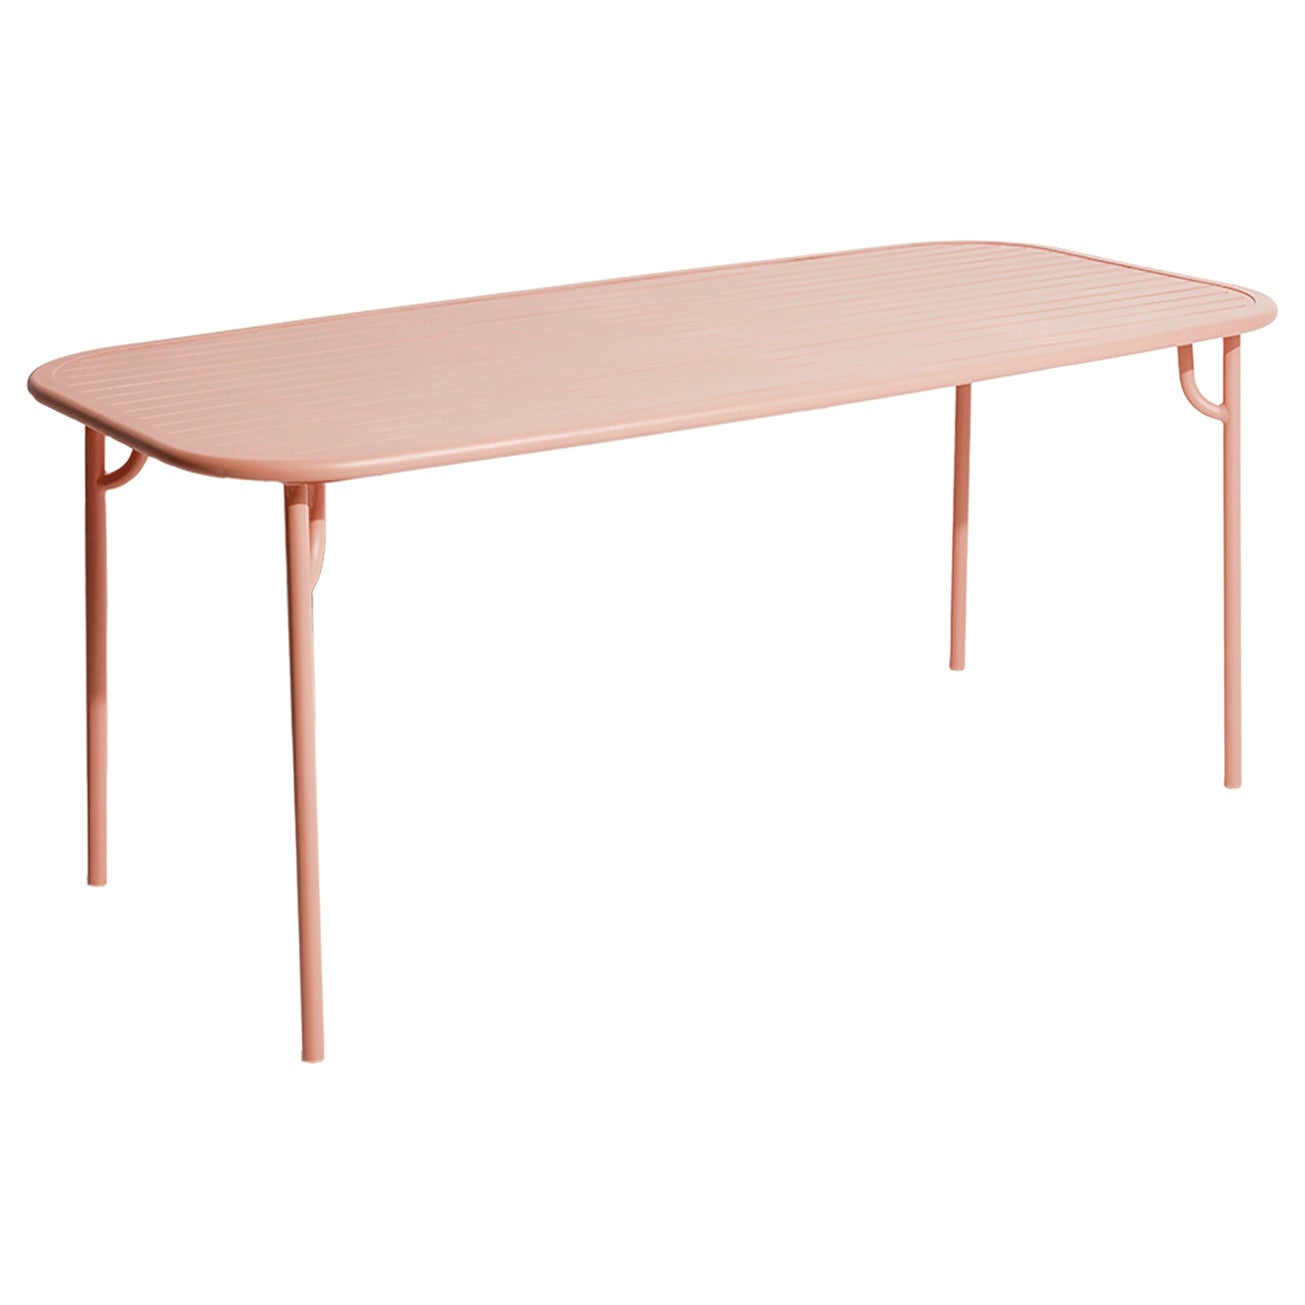 Petite Friture Week-End Medium Rectangular Dining Table in Blush with Slats For Sale